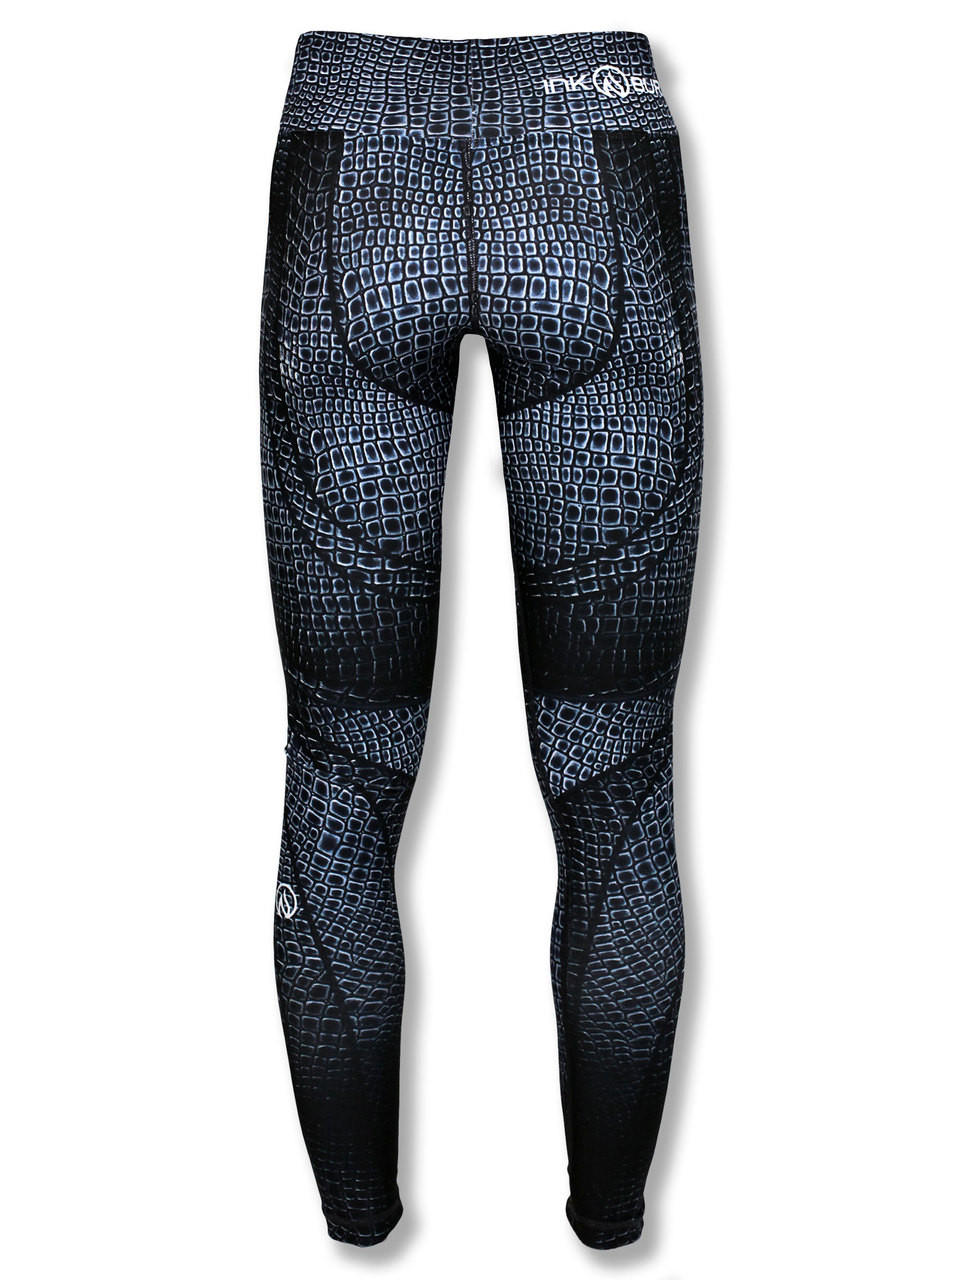 INKnBURN Women's Alligator Tights for Running, Yoga and Working Out